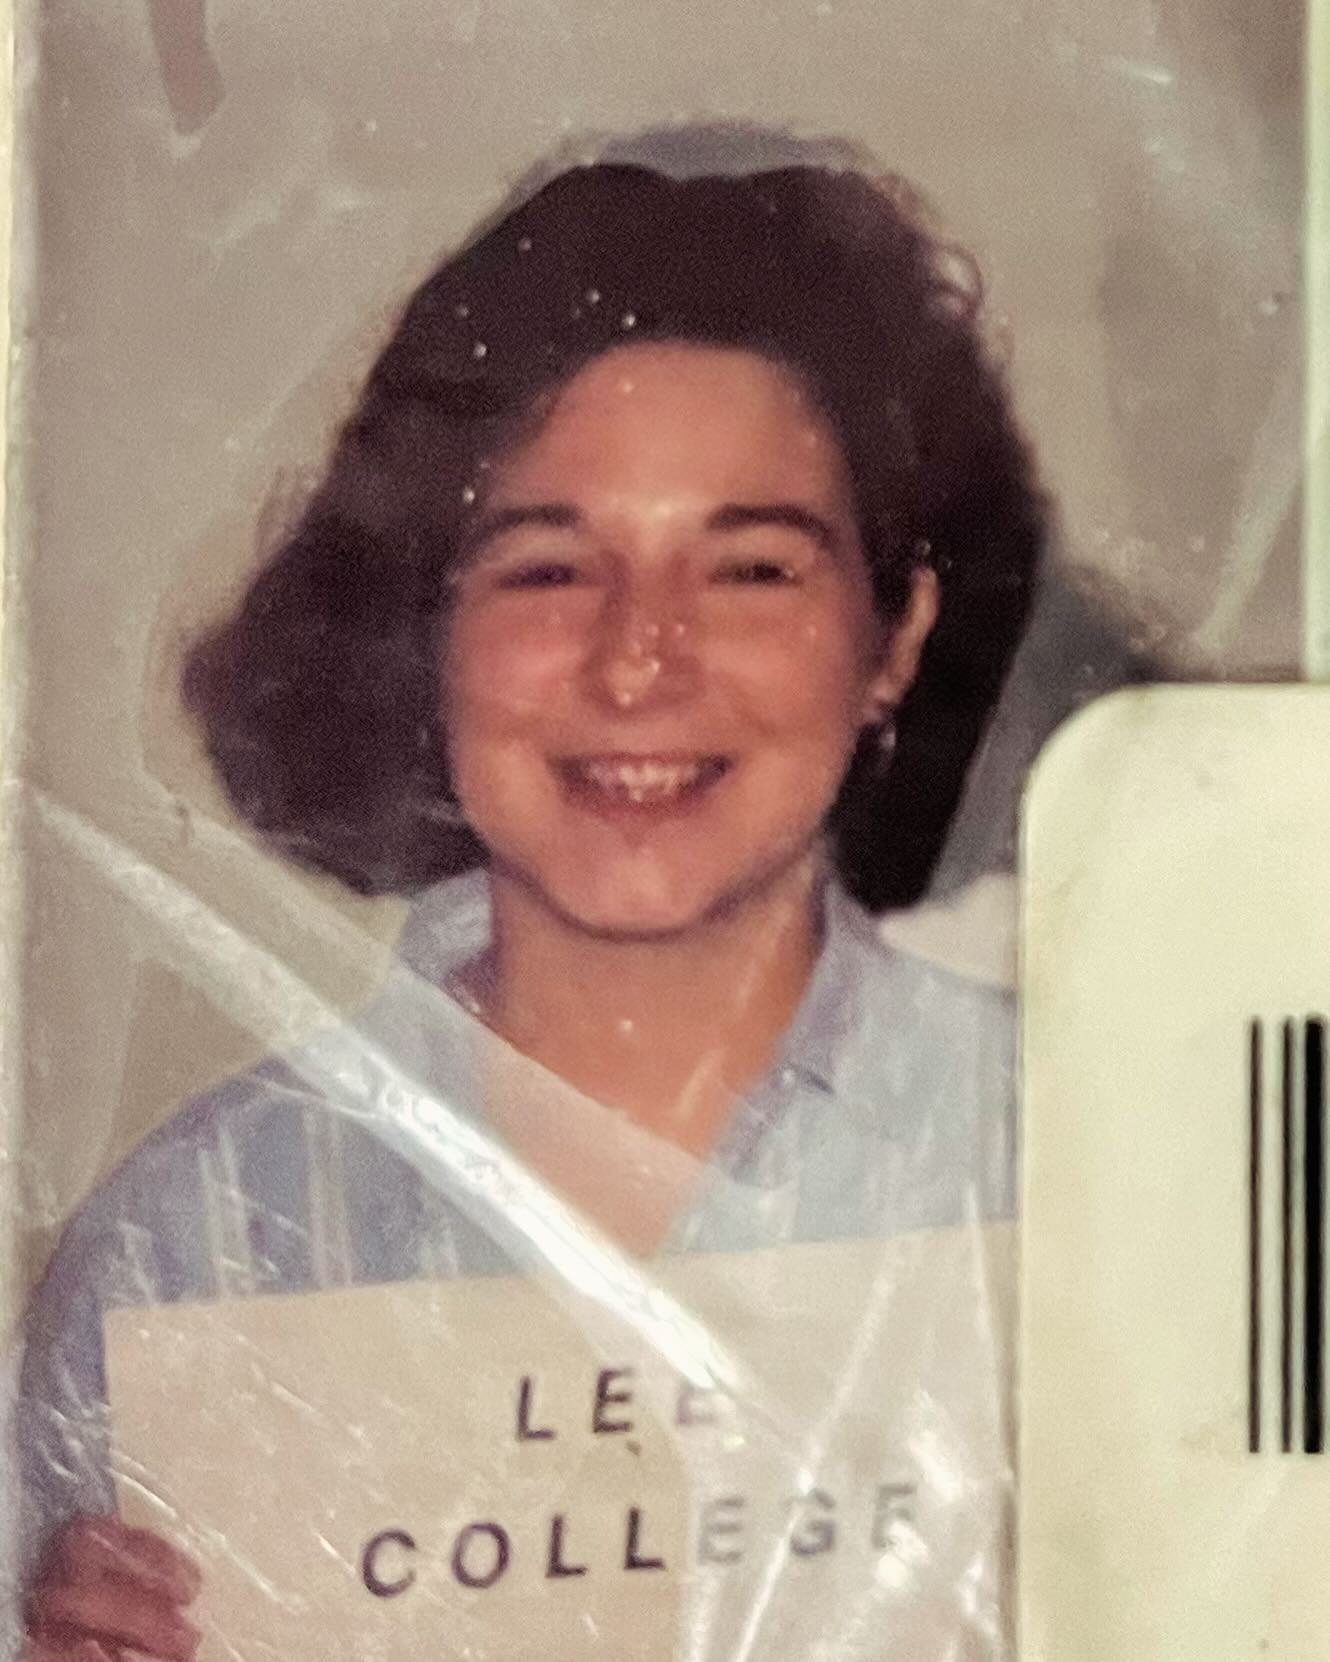 It&rsquo;s me at Lee in 1993 😂😂😂
Also, did you notice how great that rhymes?

#leecollege #leeuniversity #1993